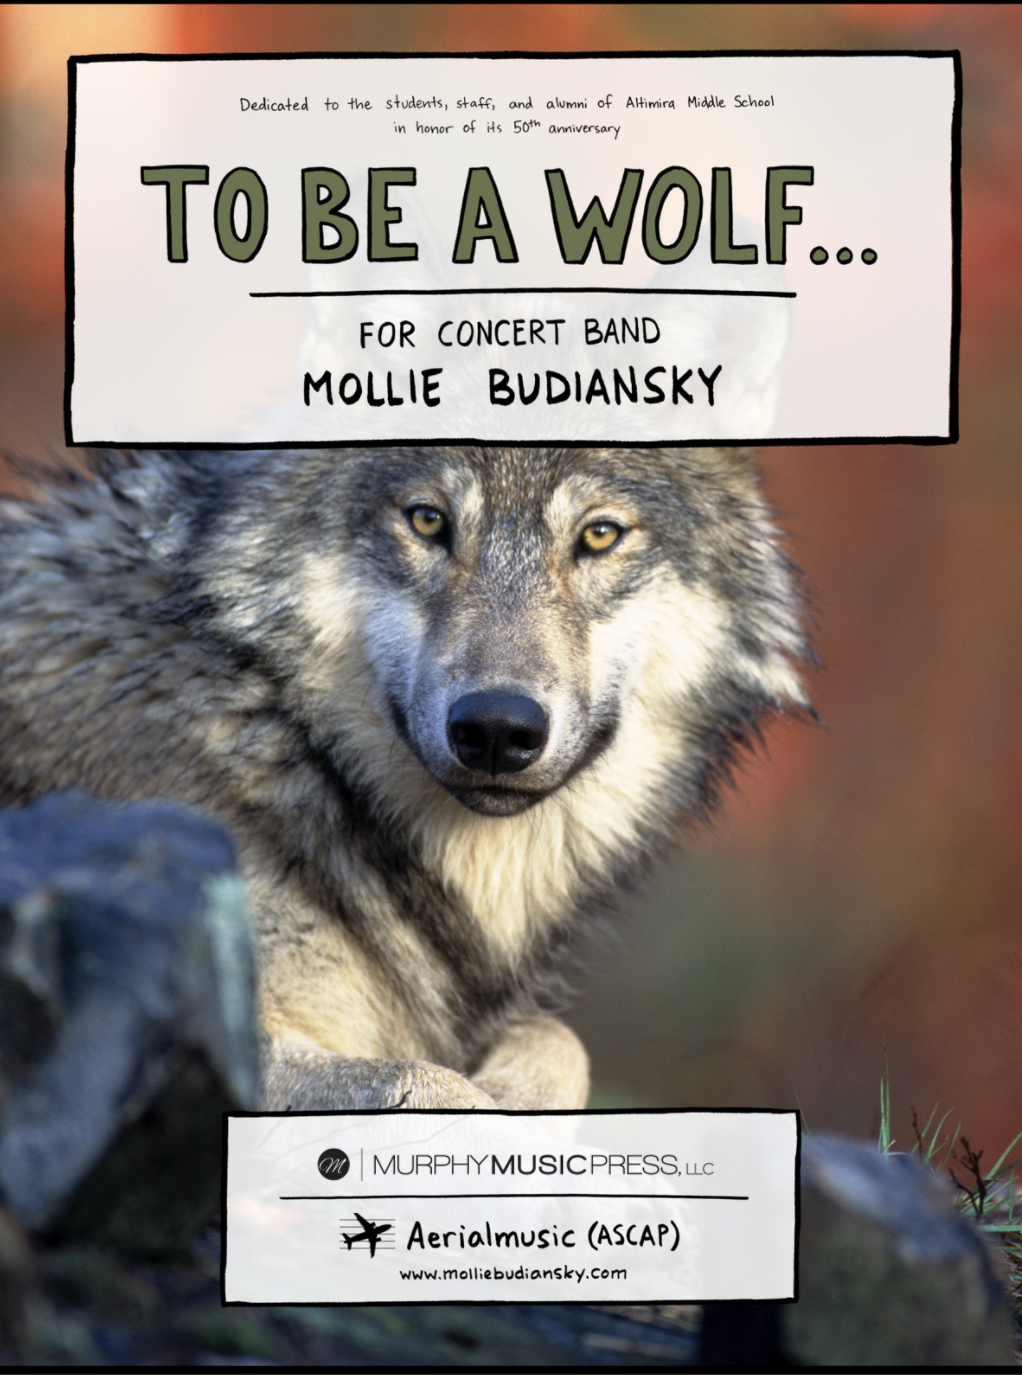 To Be A Wolf by Mollie Budiansky